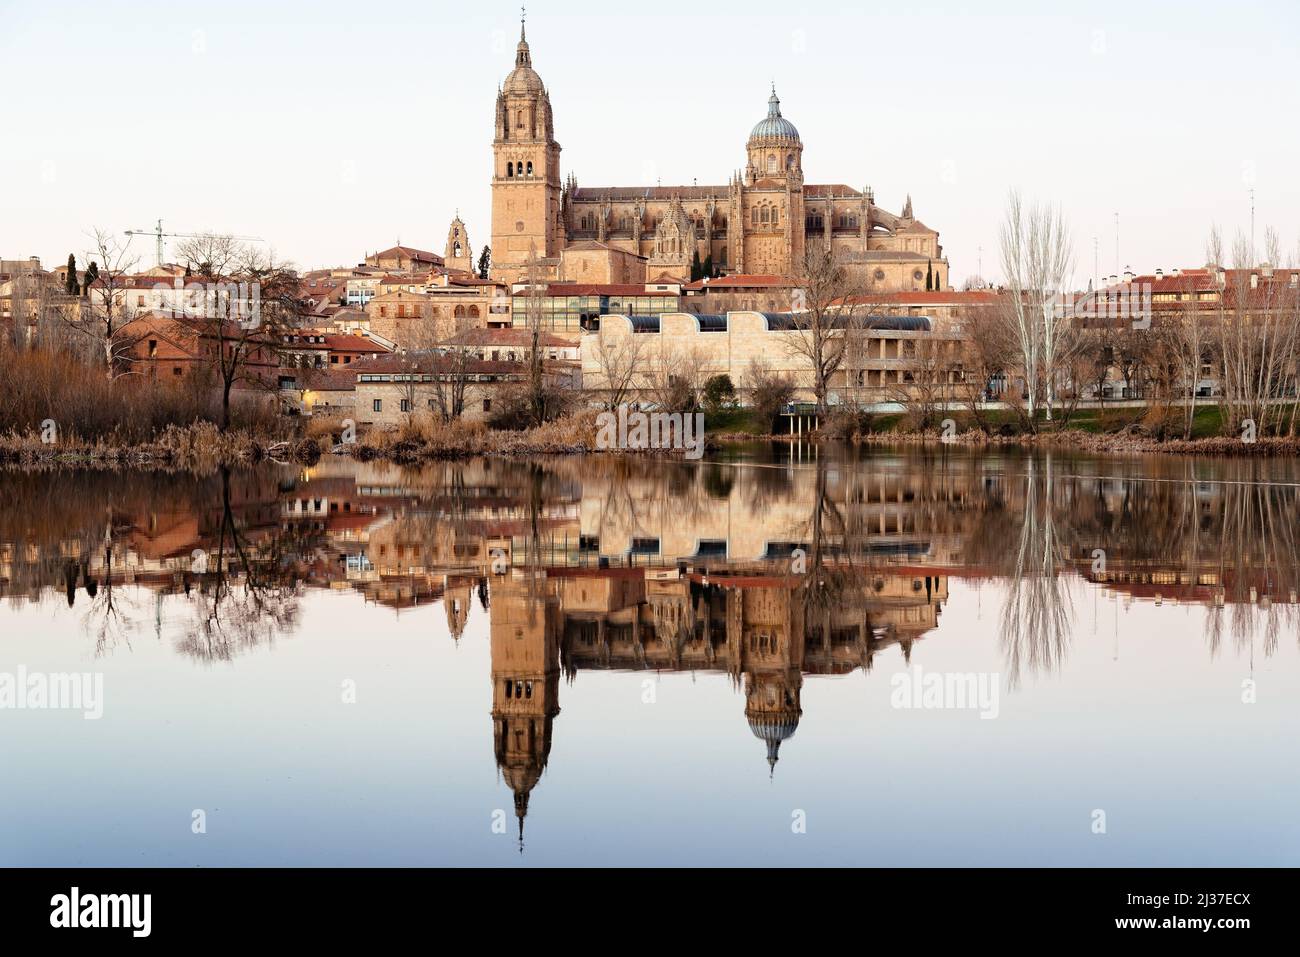 Landscape of the city of Salamanca and its cathedral reflected in the calm waters of the Tormes River. Stock Photo